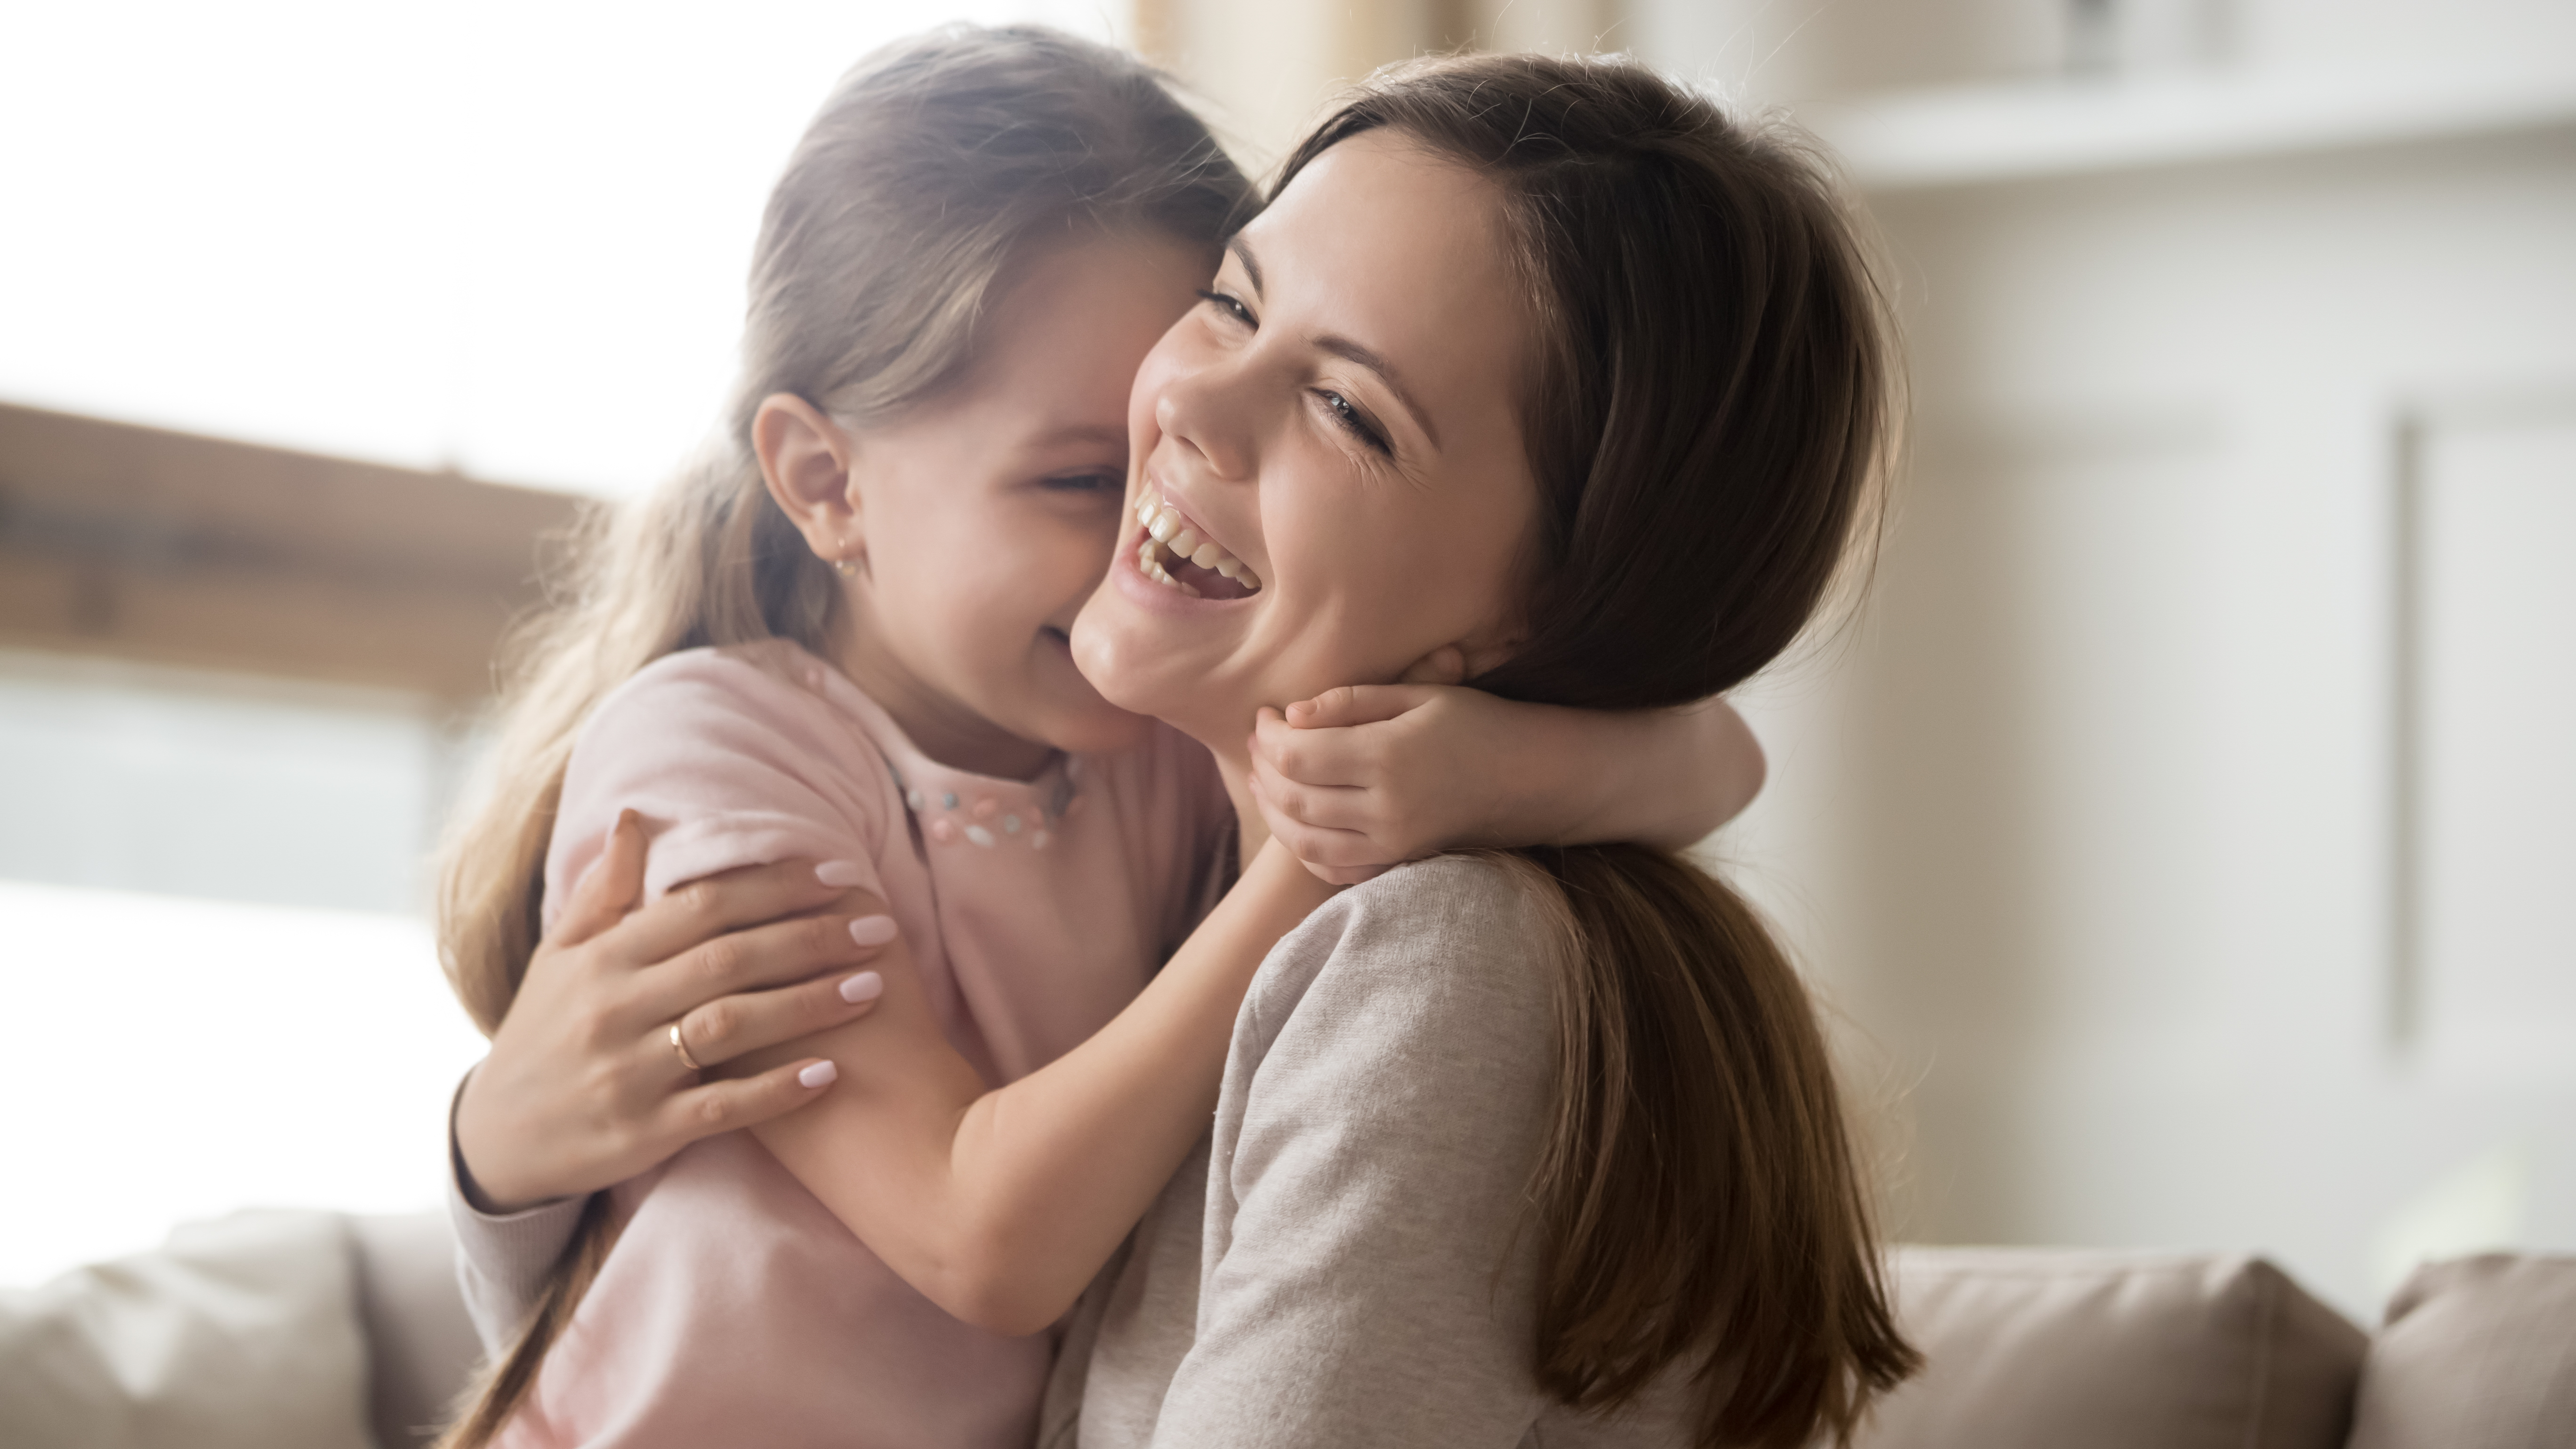 Loving young mother laughing embracing smiling cute funny kid girl | Source: Getty Images